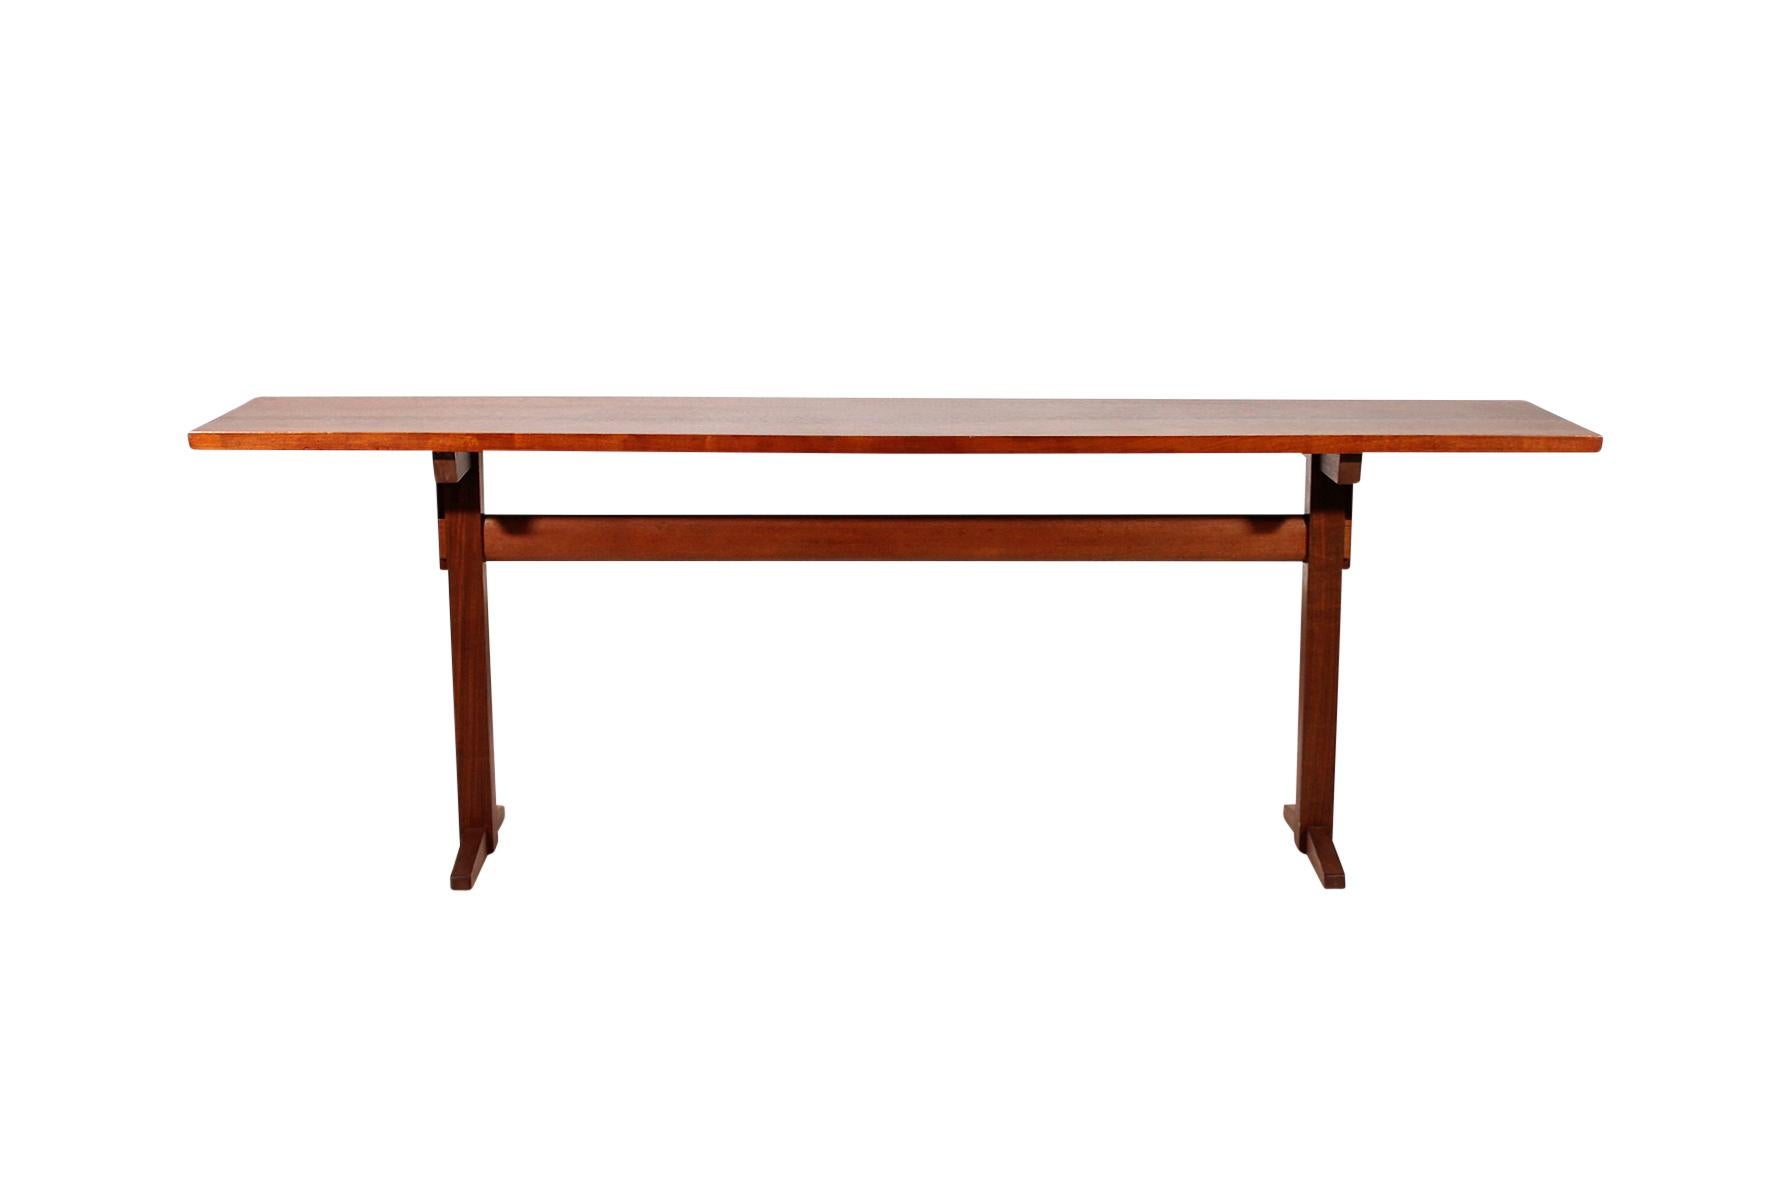 Rare and elegant 7 ft. walnut trestle console table by famed Japanese American woodworker and designer George Nakashima, circa 1959. Provenance included. Very good condition.